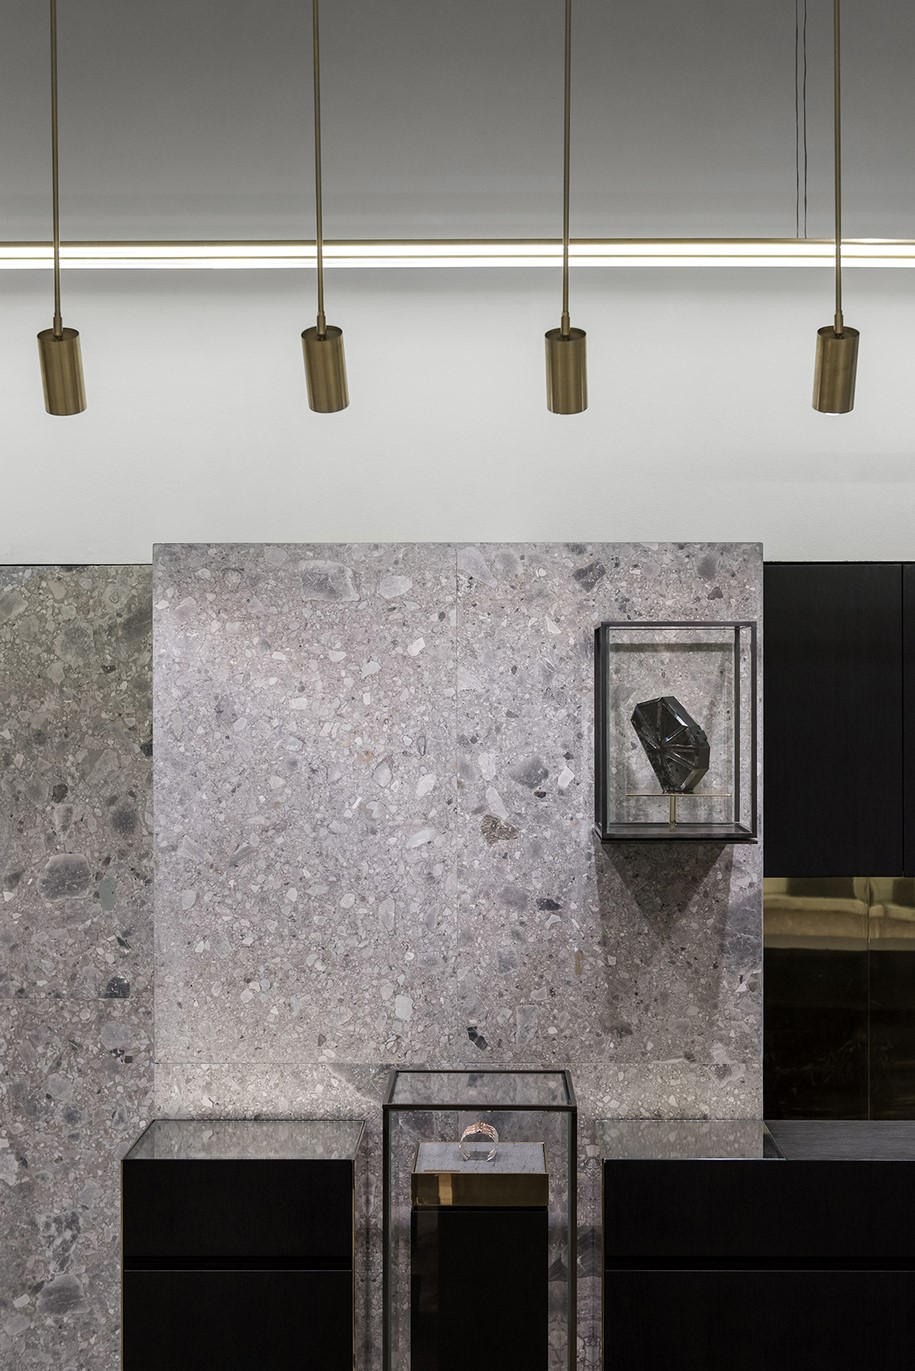 Archisearch Kois Associated Architects Composed an Unexpected Store for Ileana Makri Jewellery